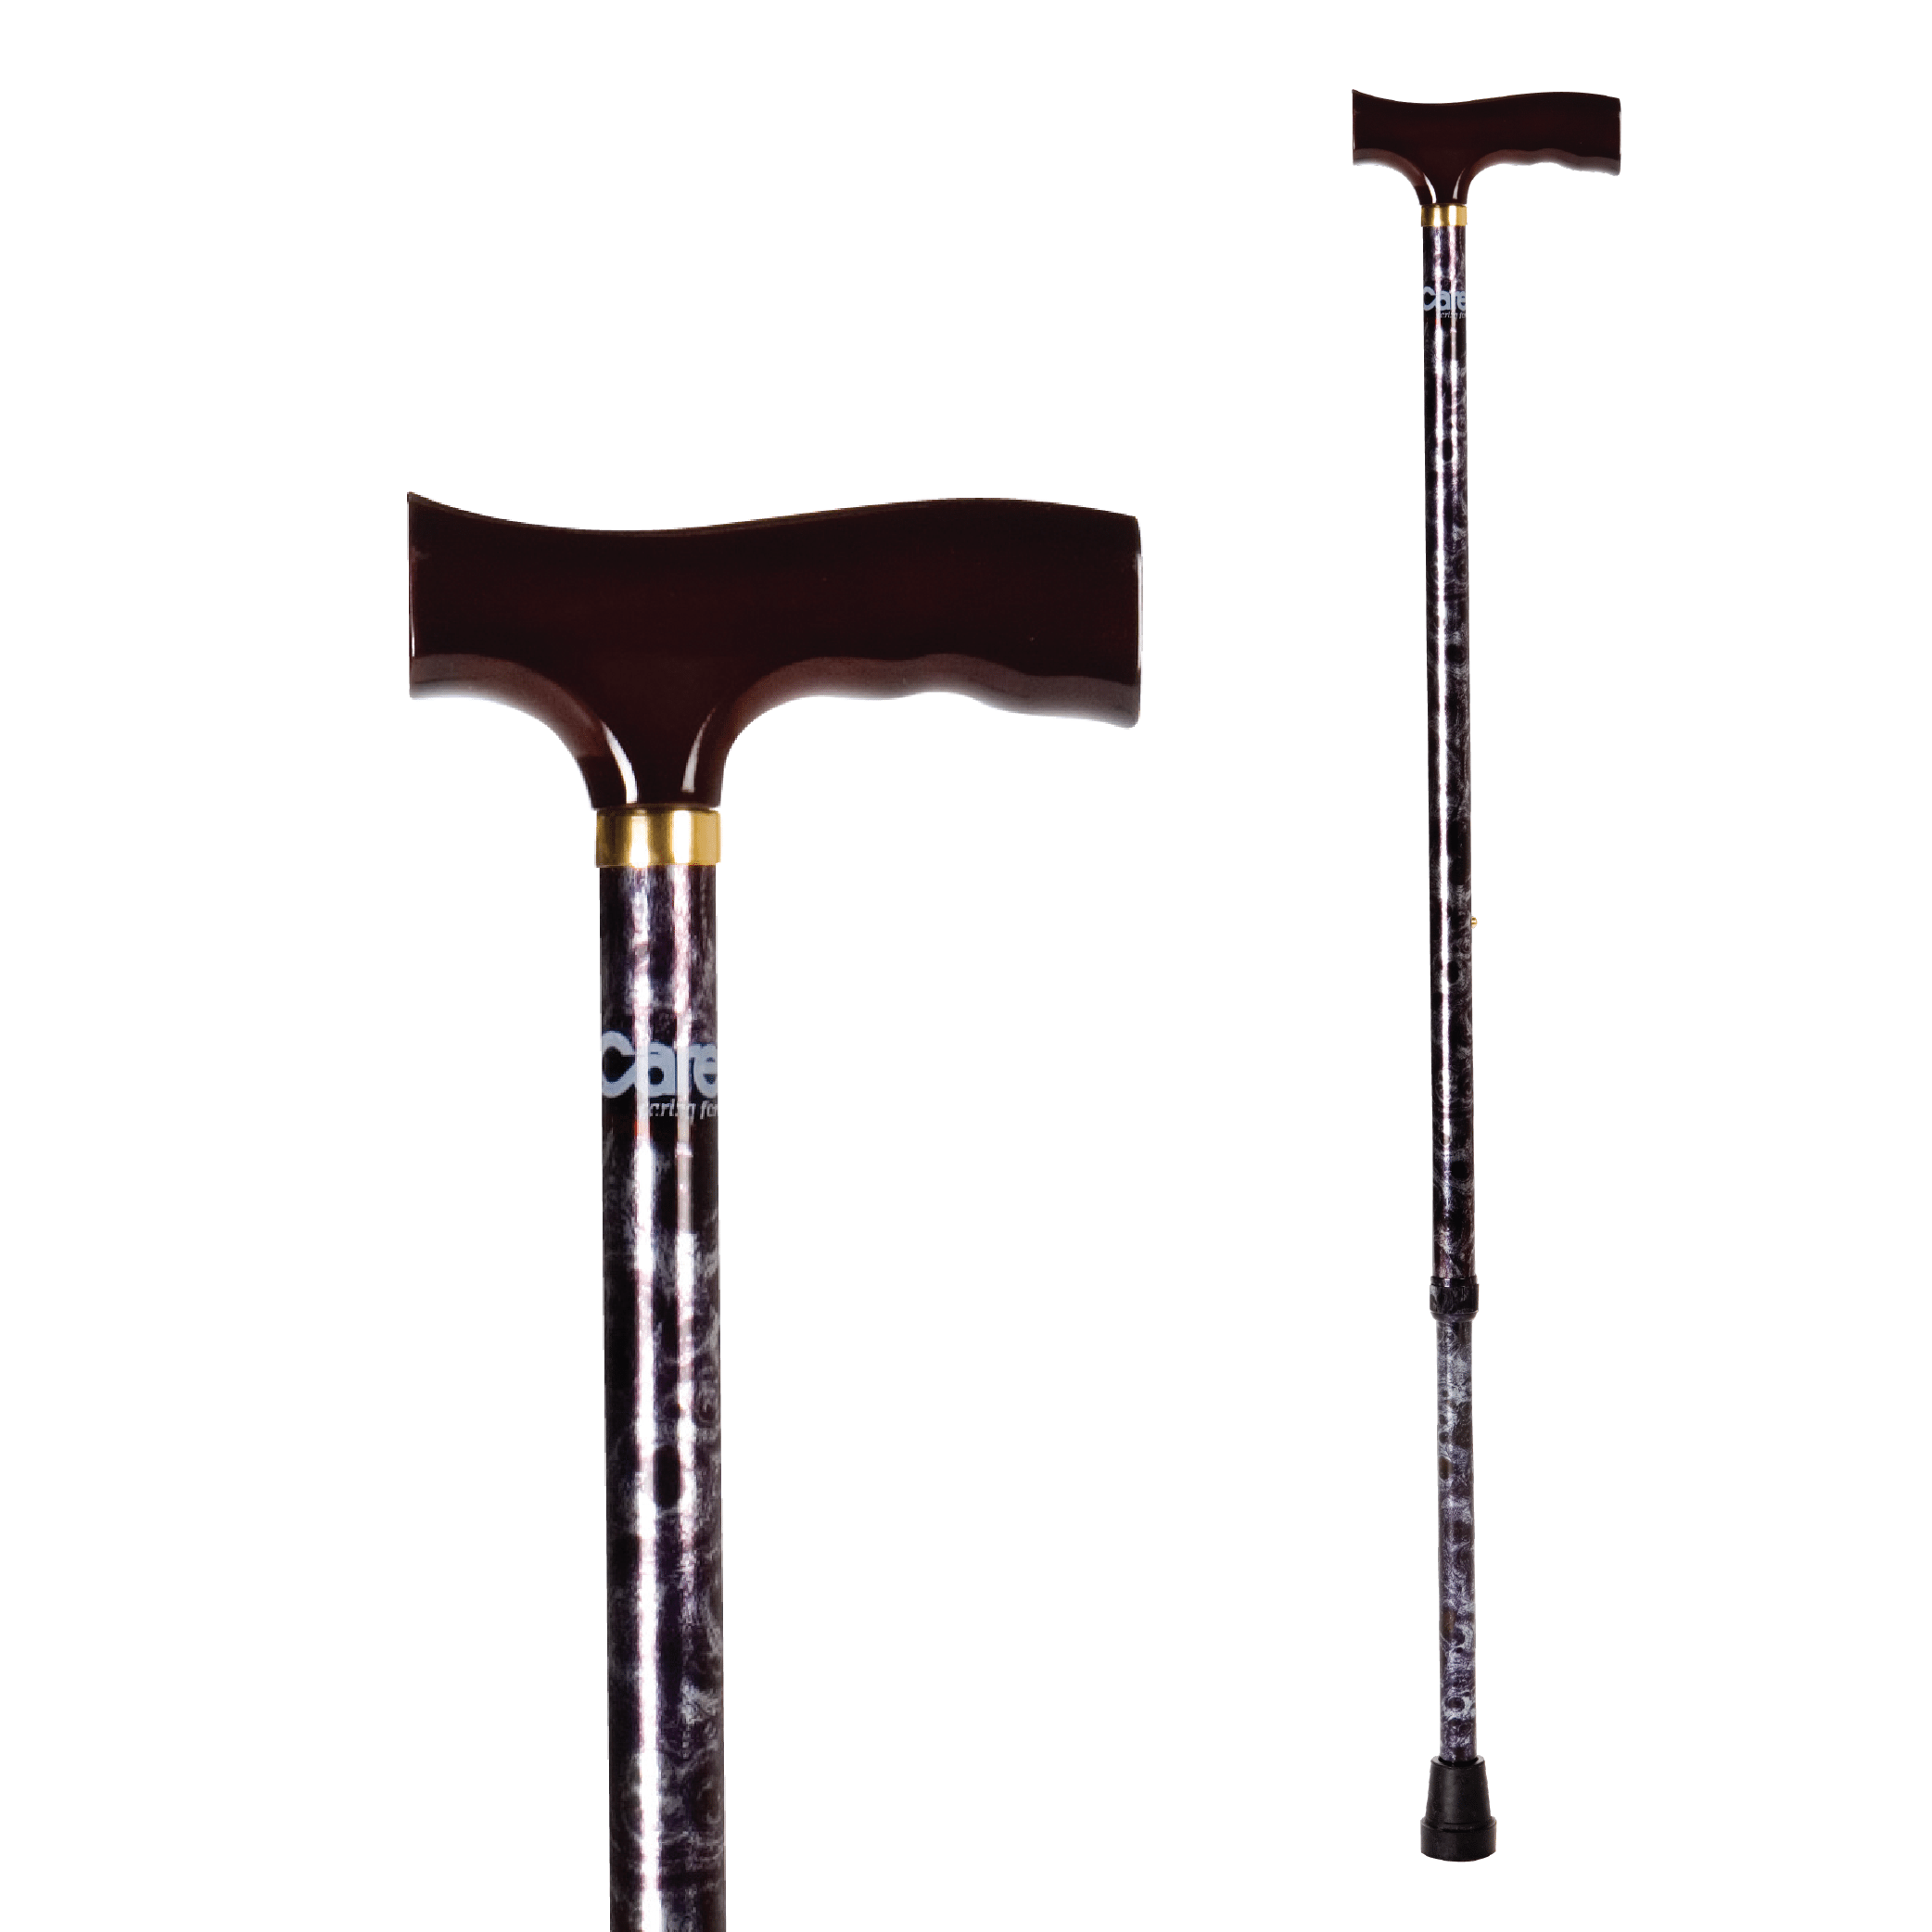 Carex Soft Grip Folding Cane - Foldable Walking Cane for Women and Men -  Adjustable Height (33-37), Anti-Slip Rubber Tip, Soft Derby Style  Ergonomic